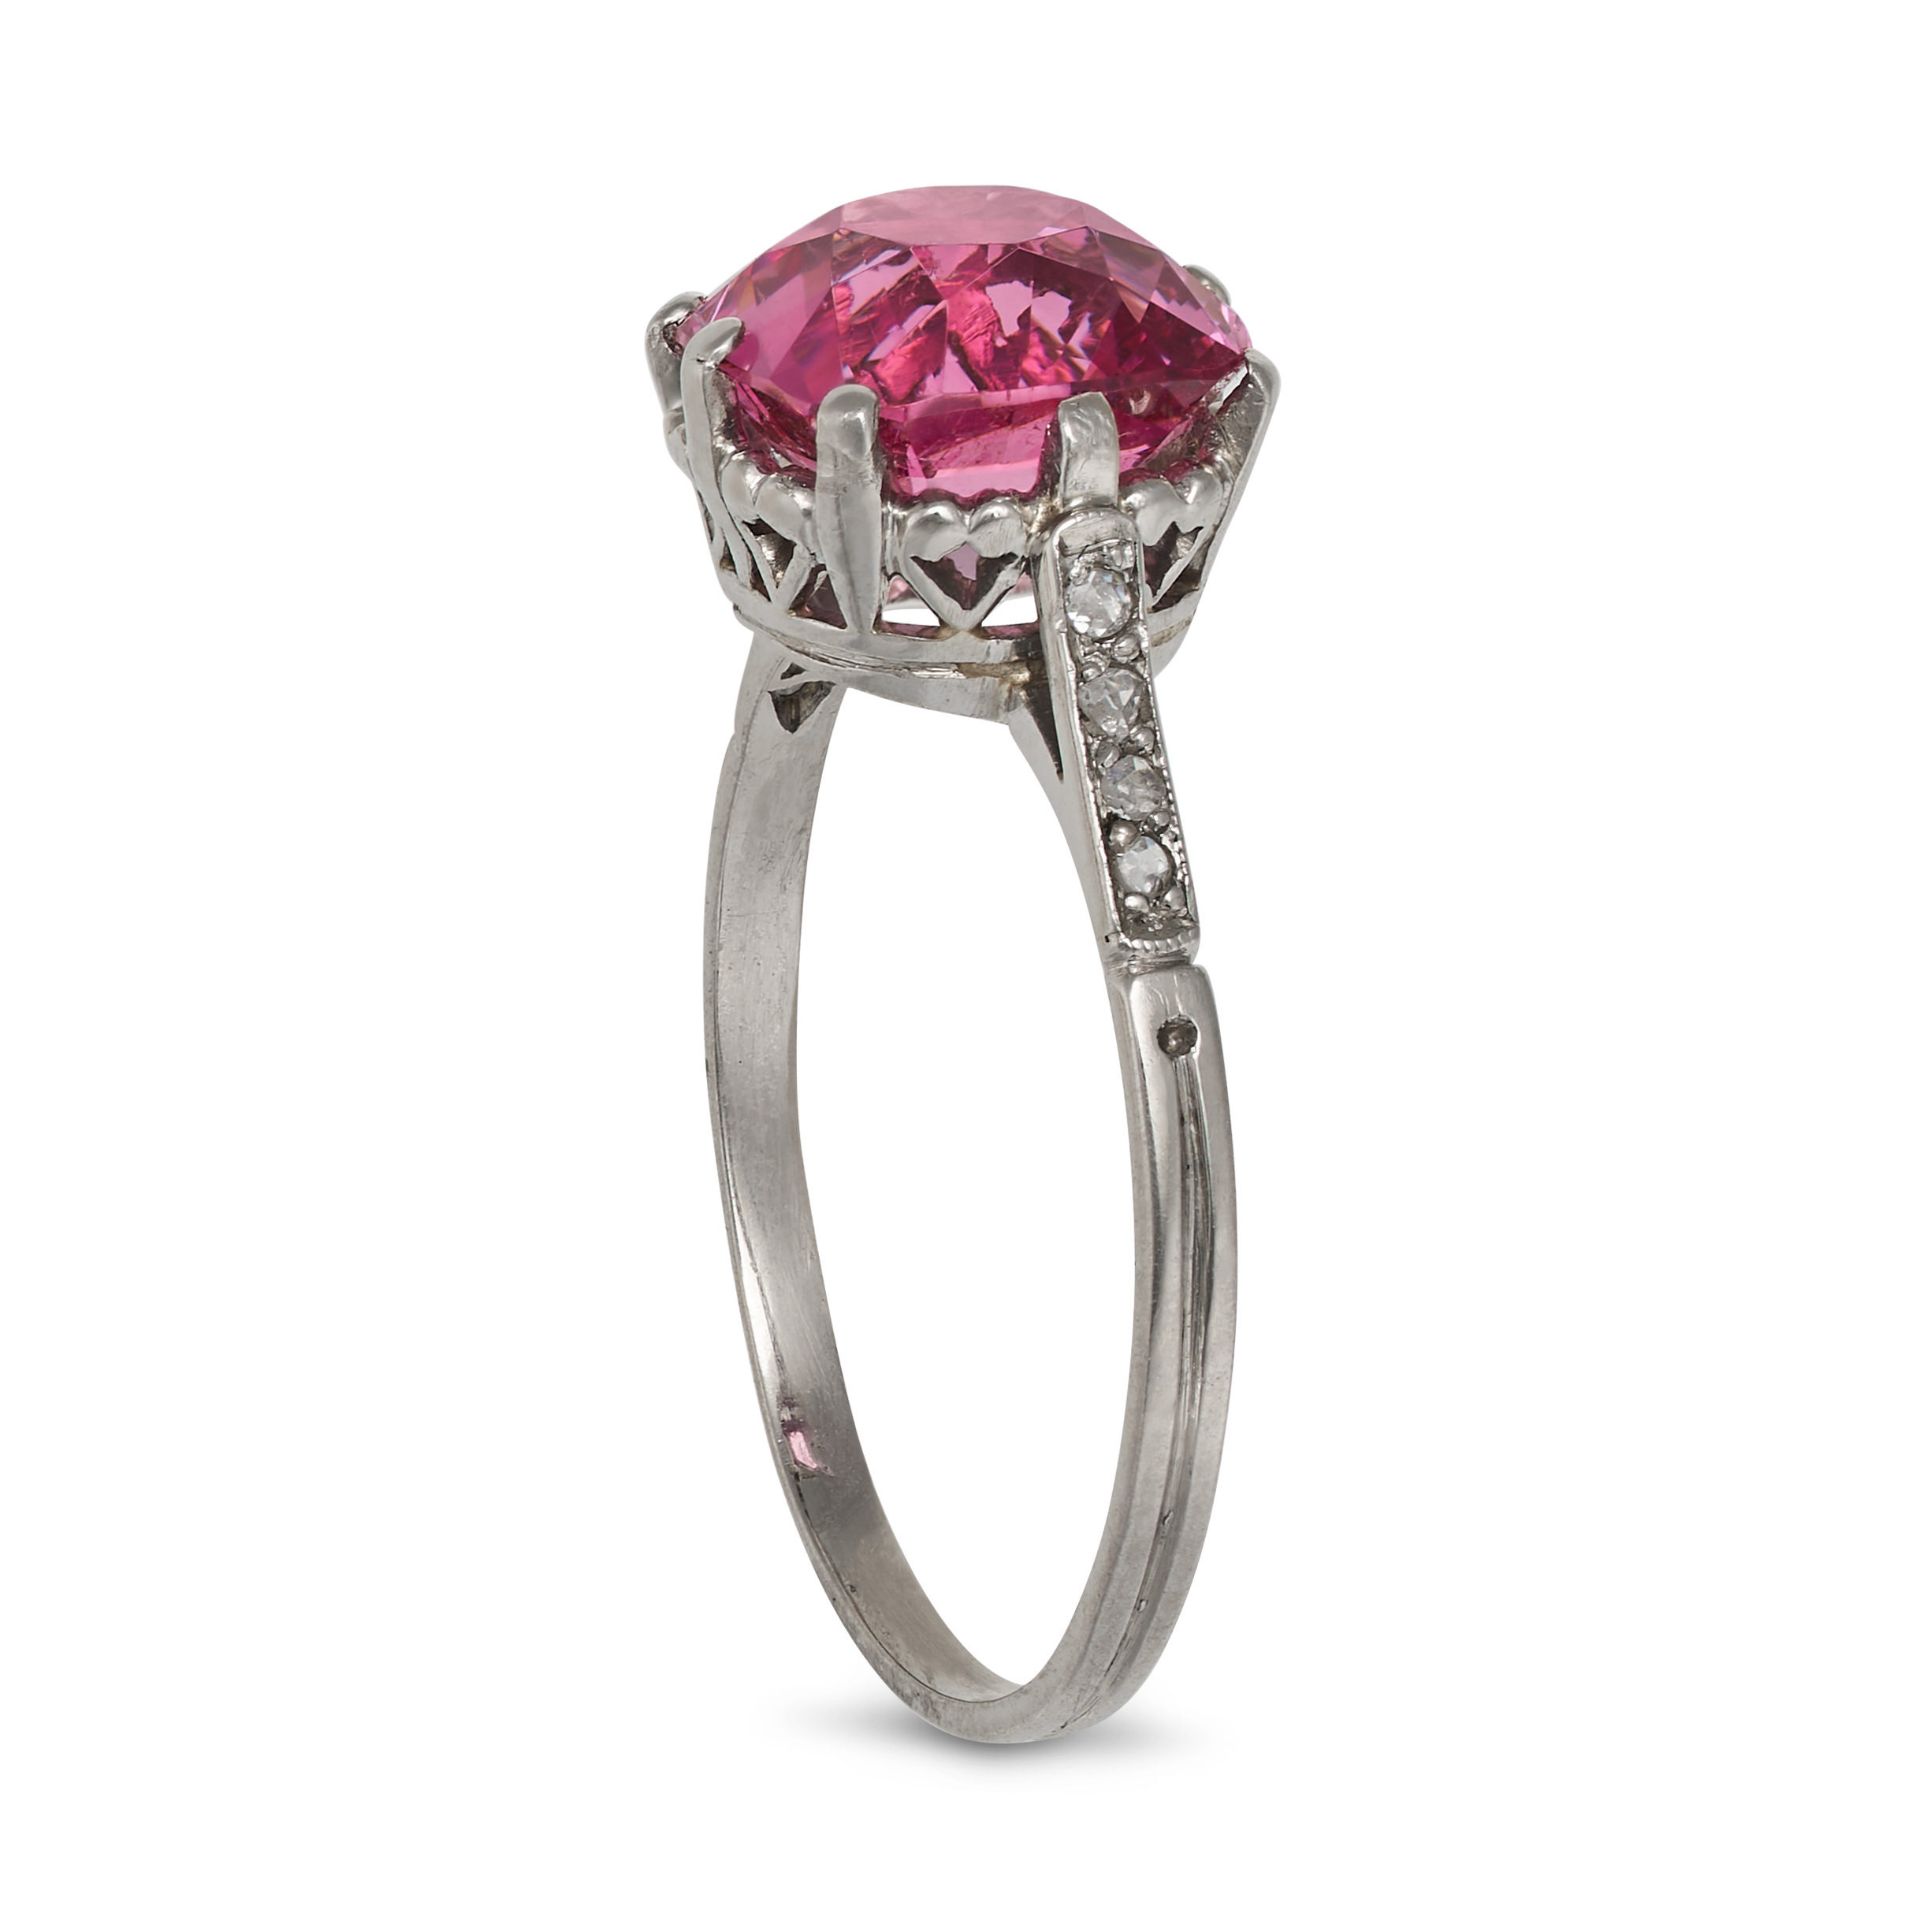 AN ANTIQUE ART DECO BURMA NO HEAT PINK SPINEL AND DIAMOND RING in platinum, set with a cushion cu... - Image 2 of 2